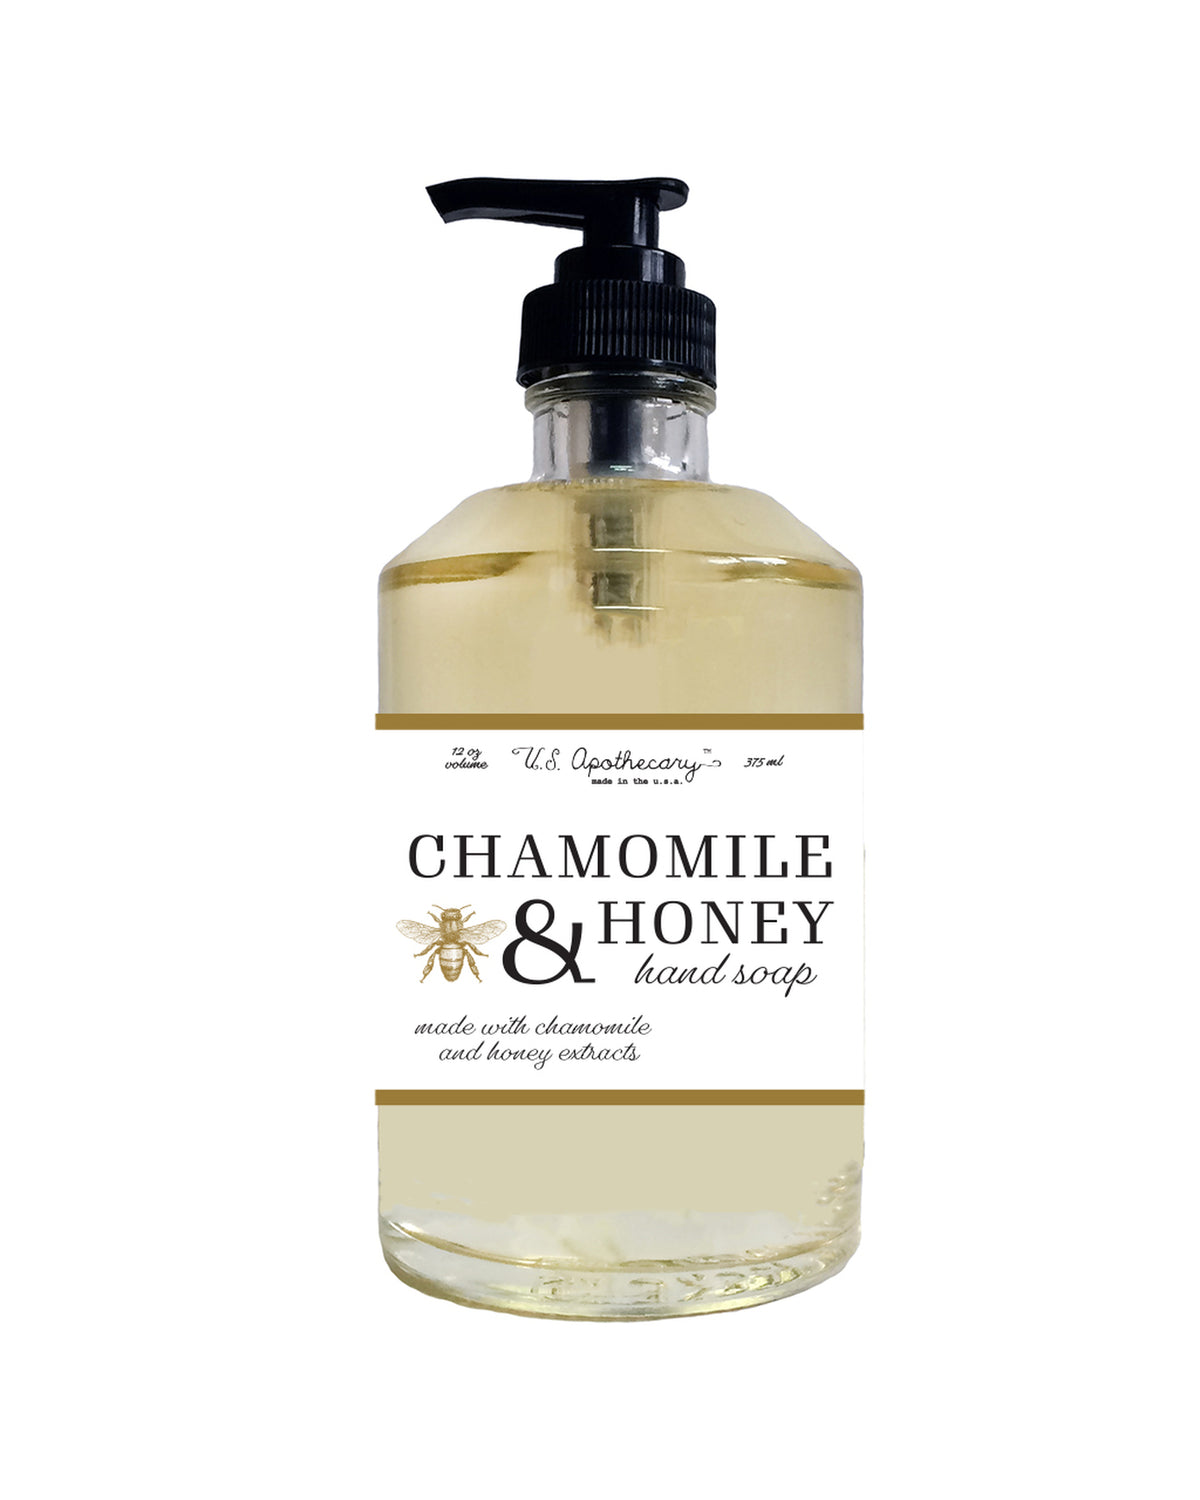 A clear bottle of U.S. Apothecary Chamomile & Honey Liquid Soap with a black pump dispenser, labeled "chamomile & honey hand soap" in elegant script, indicating it's made with chamomile and honey extracts.